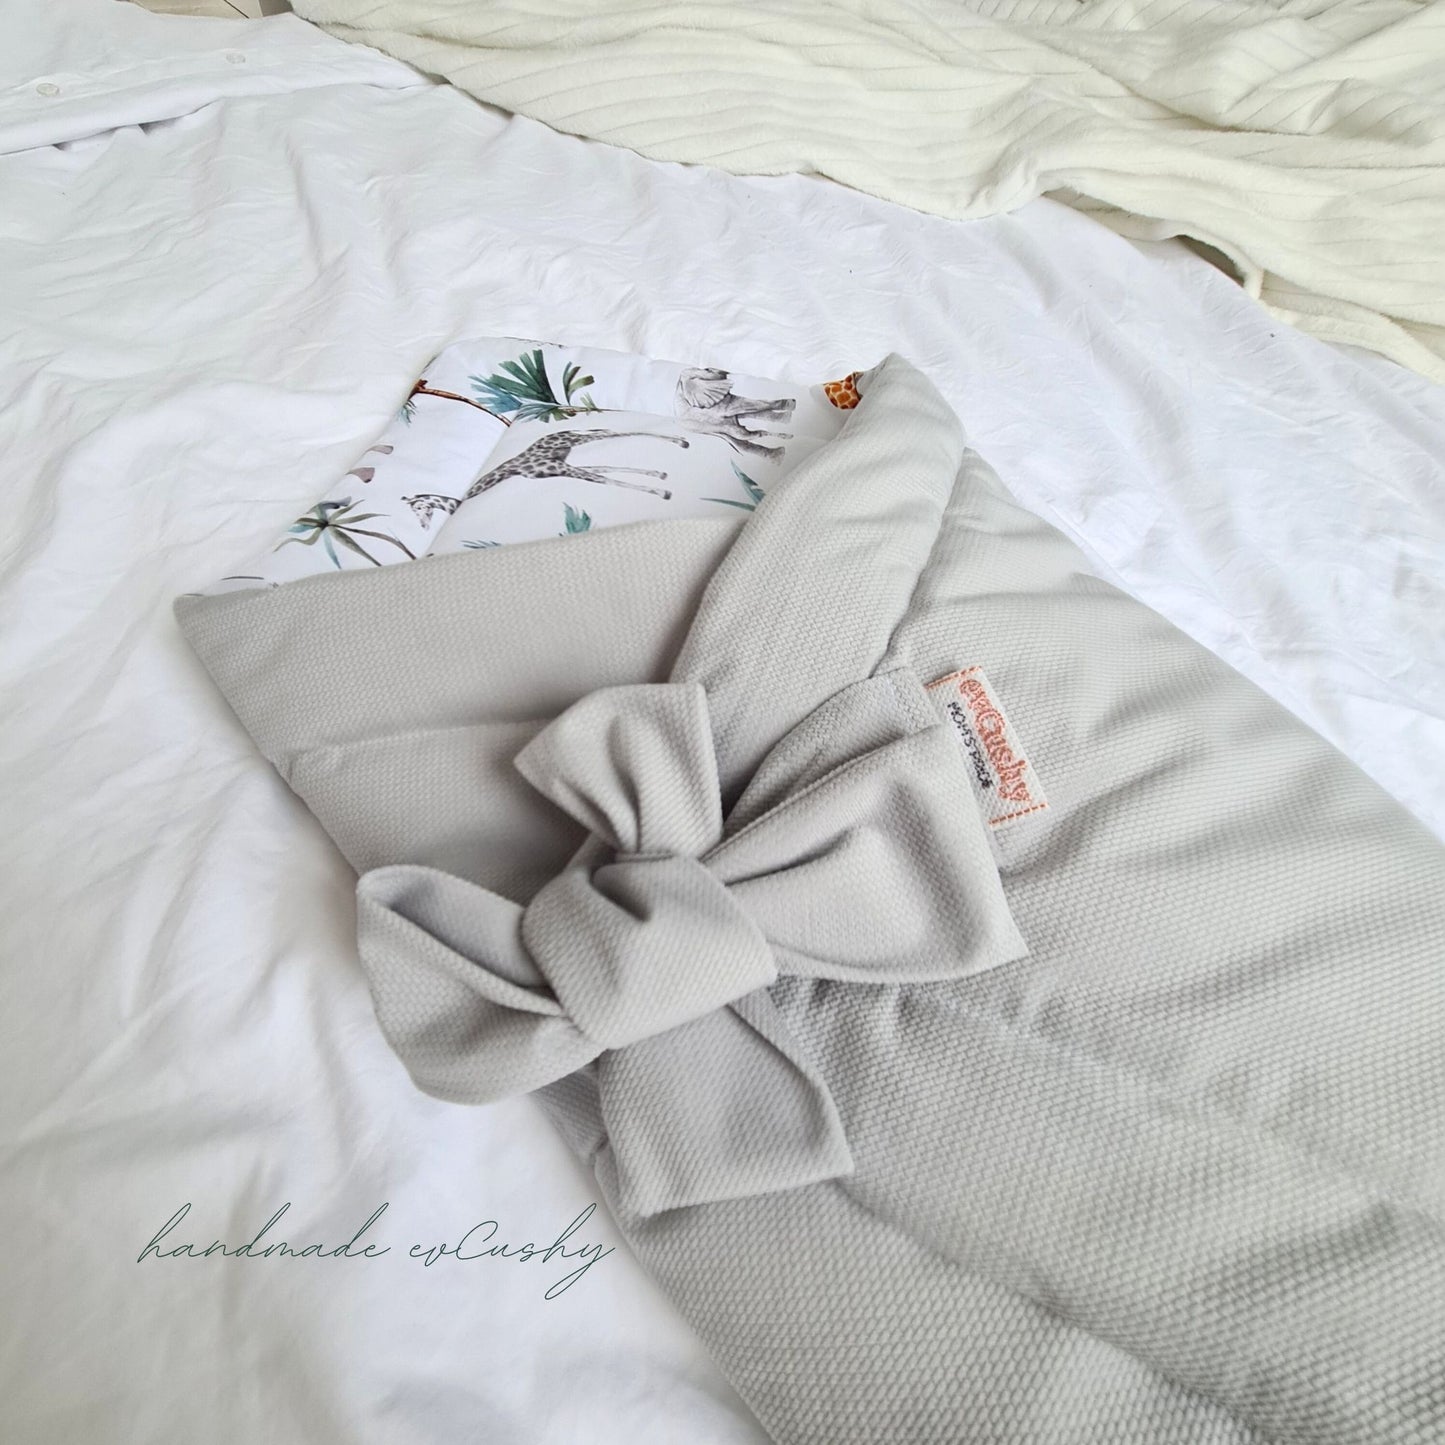 multi-functional 3-in-1 swaddle blanket, featuring a stylish grey exterior and a delightful safari animal pattern on the inside. It is elegantly tied with a bow for added charm.